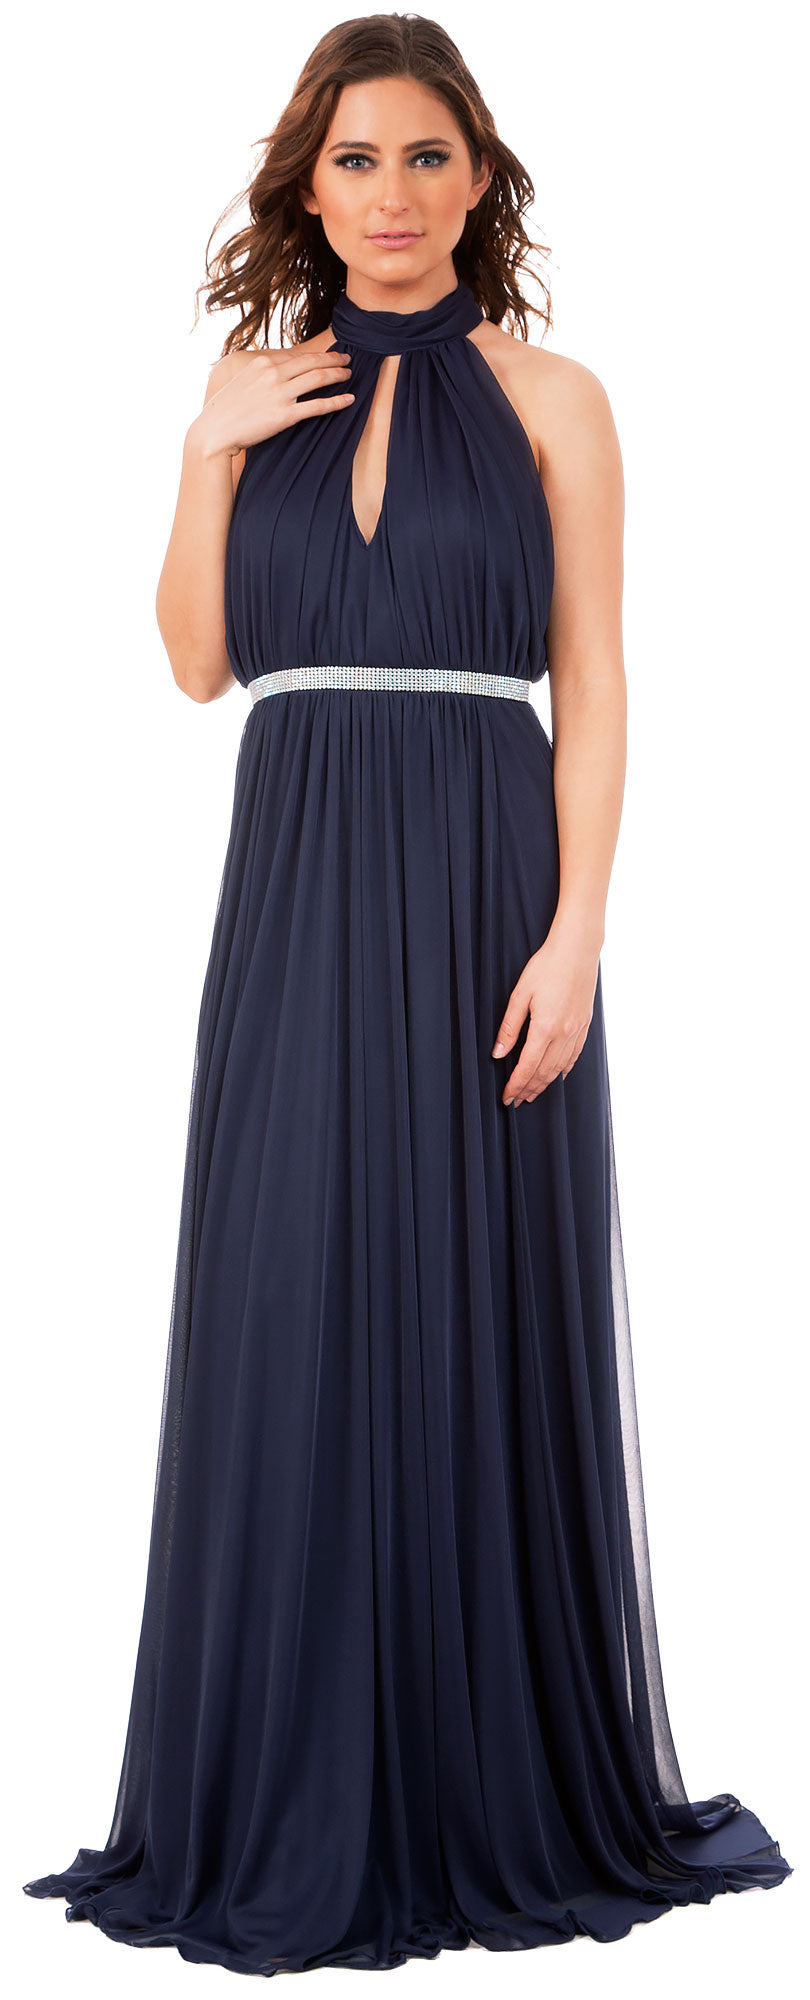 Image of High Halter Neck Long Formal Bridesmaid Dress With Keyhole in Navy